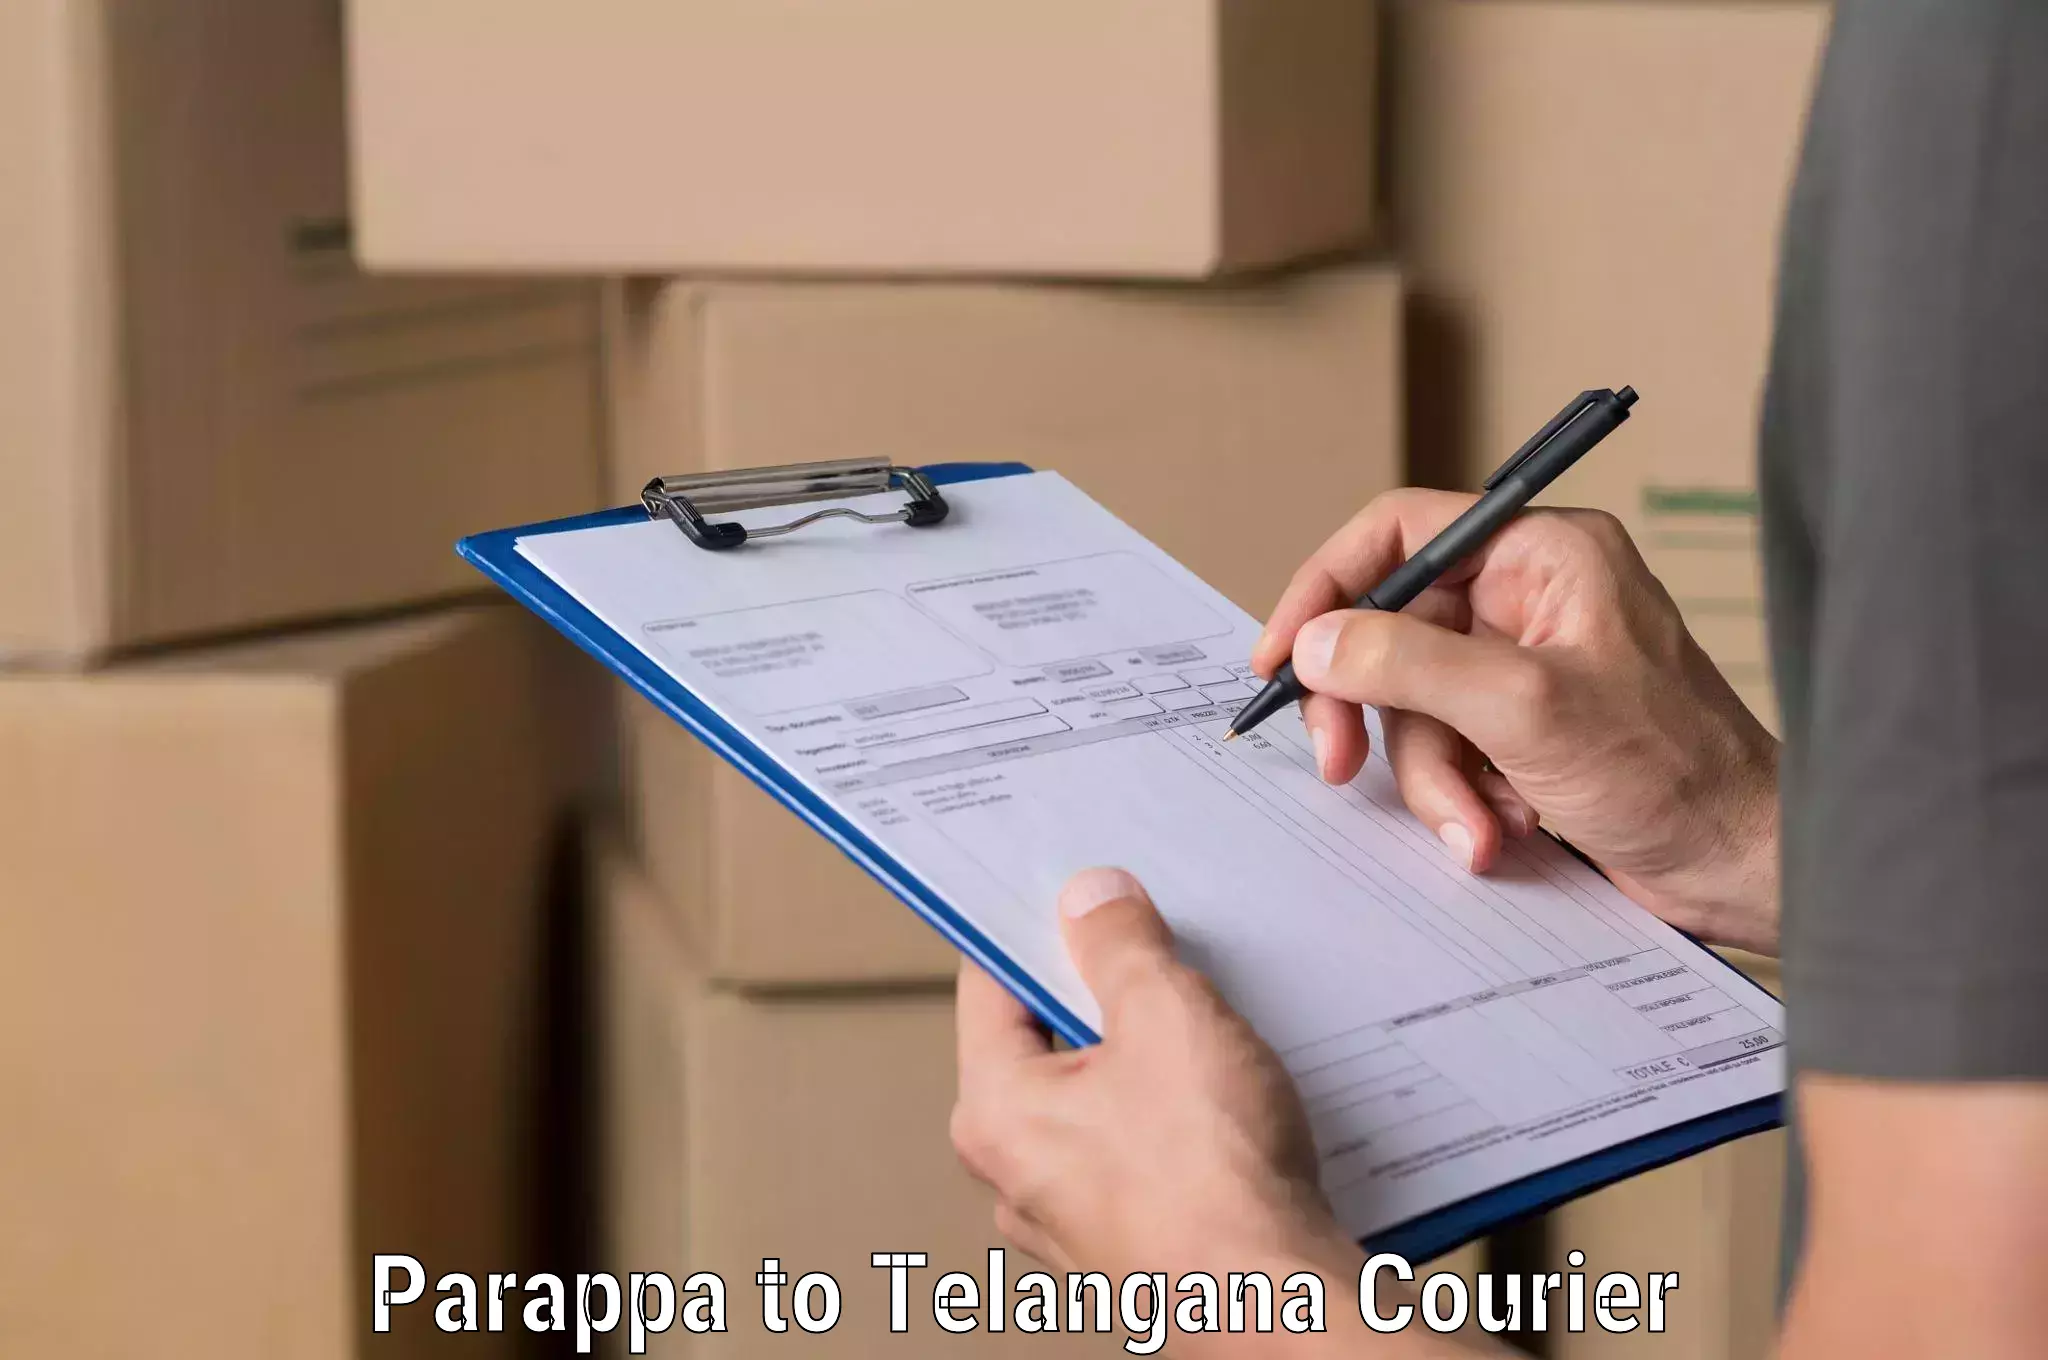 Courier service comparison in Parappa to Telangana